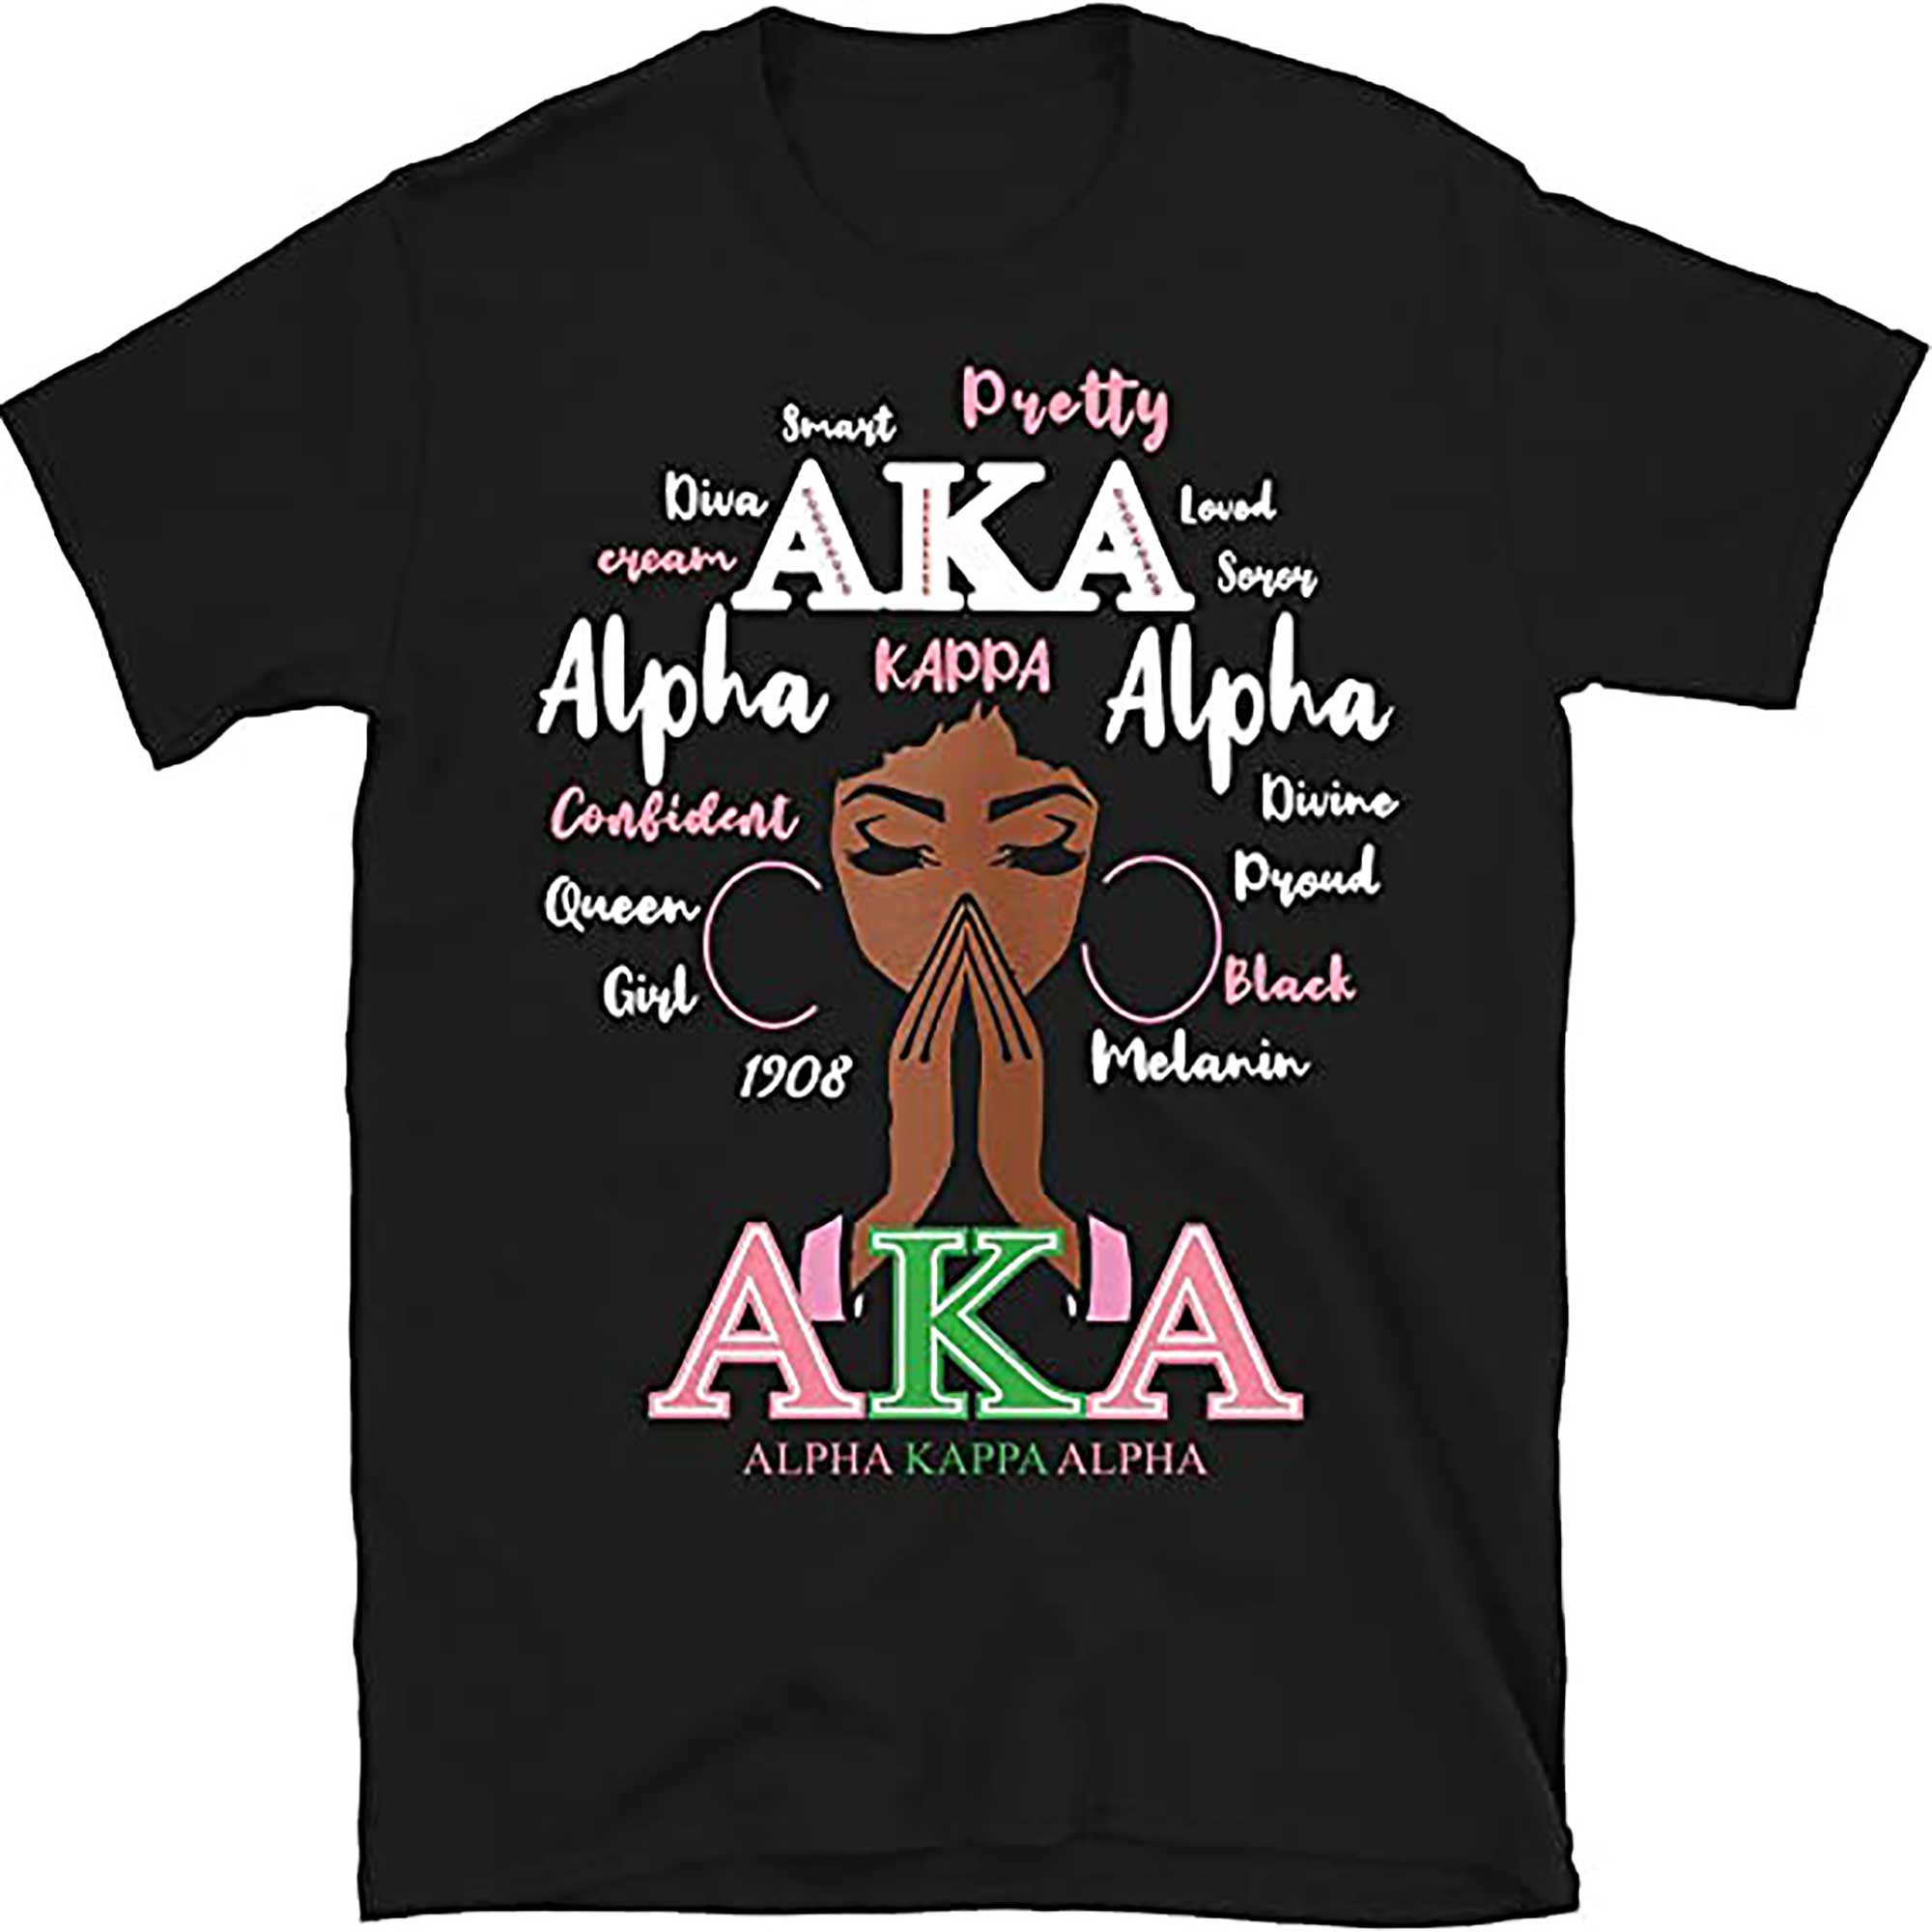 Aka 1980 History Month Shirt Education is Root of Freedom Gift for Dope Melanin Women